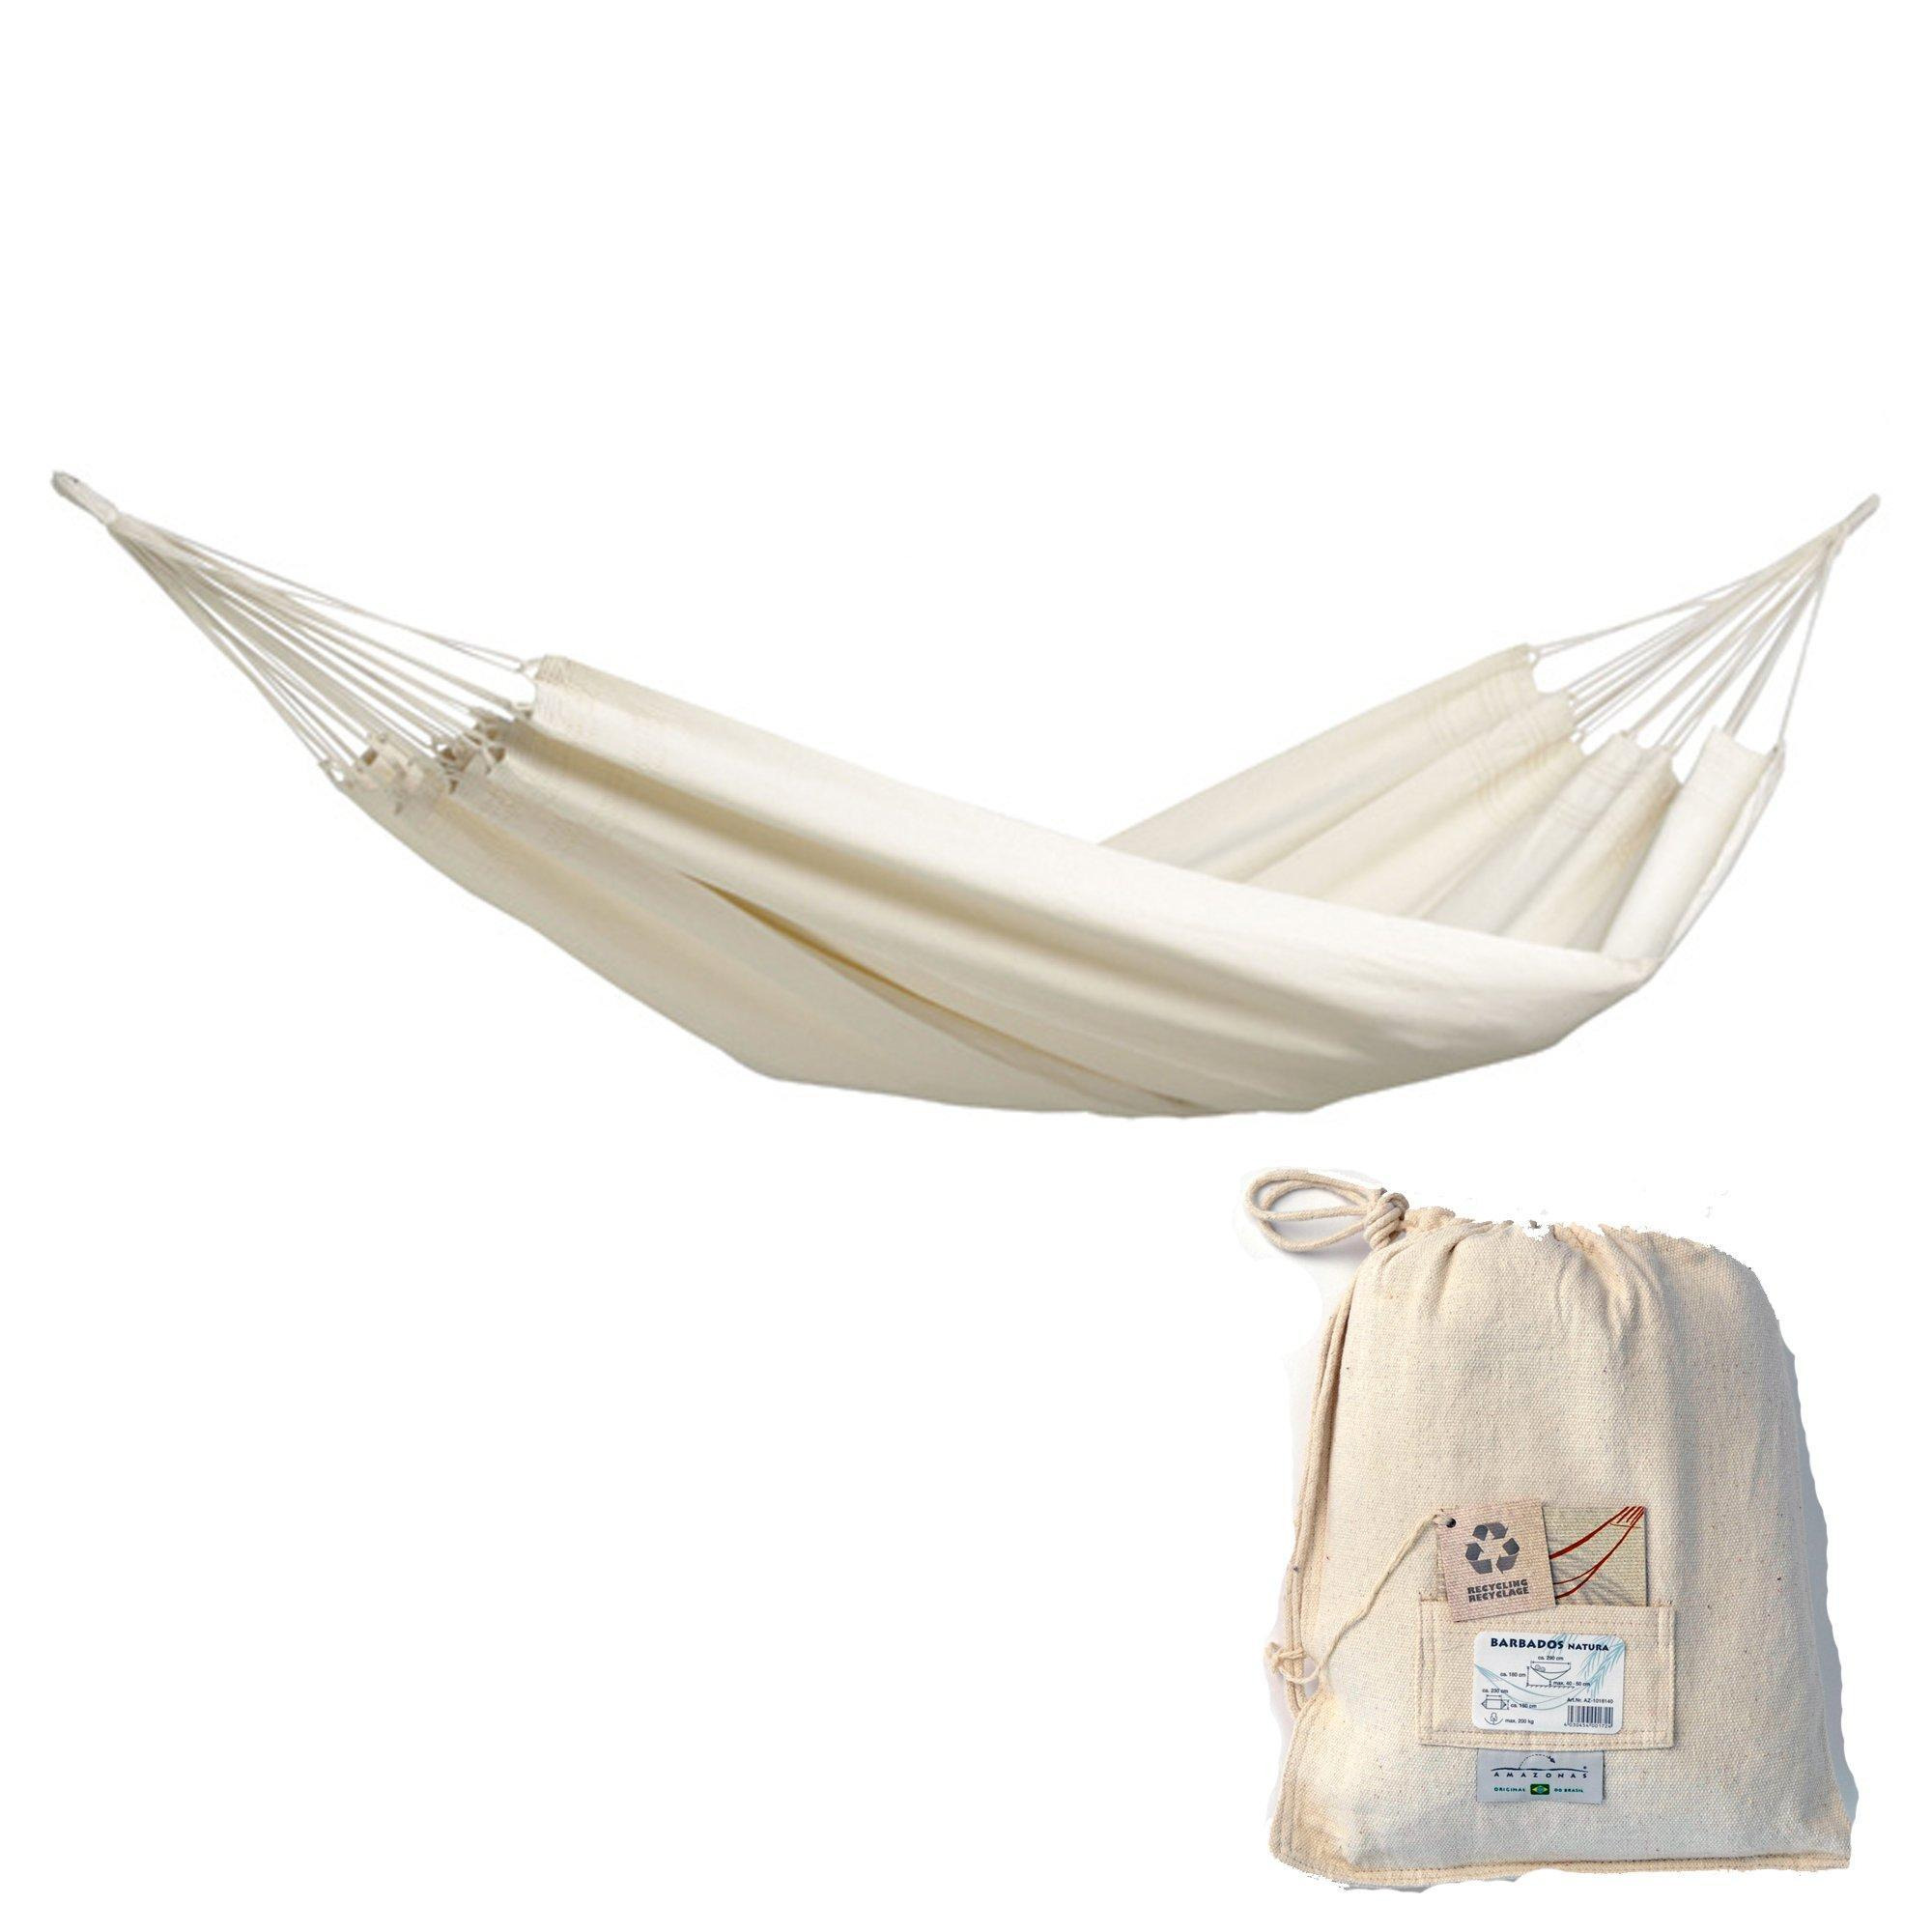 Amazonas Barbados Cotton Double 2 Seat/Person Sized Classic Garden Hammock With Bag -  Natura - image 1